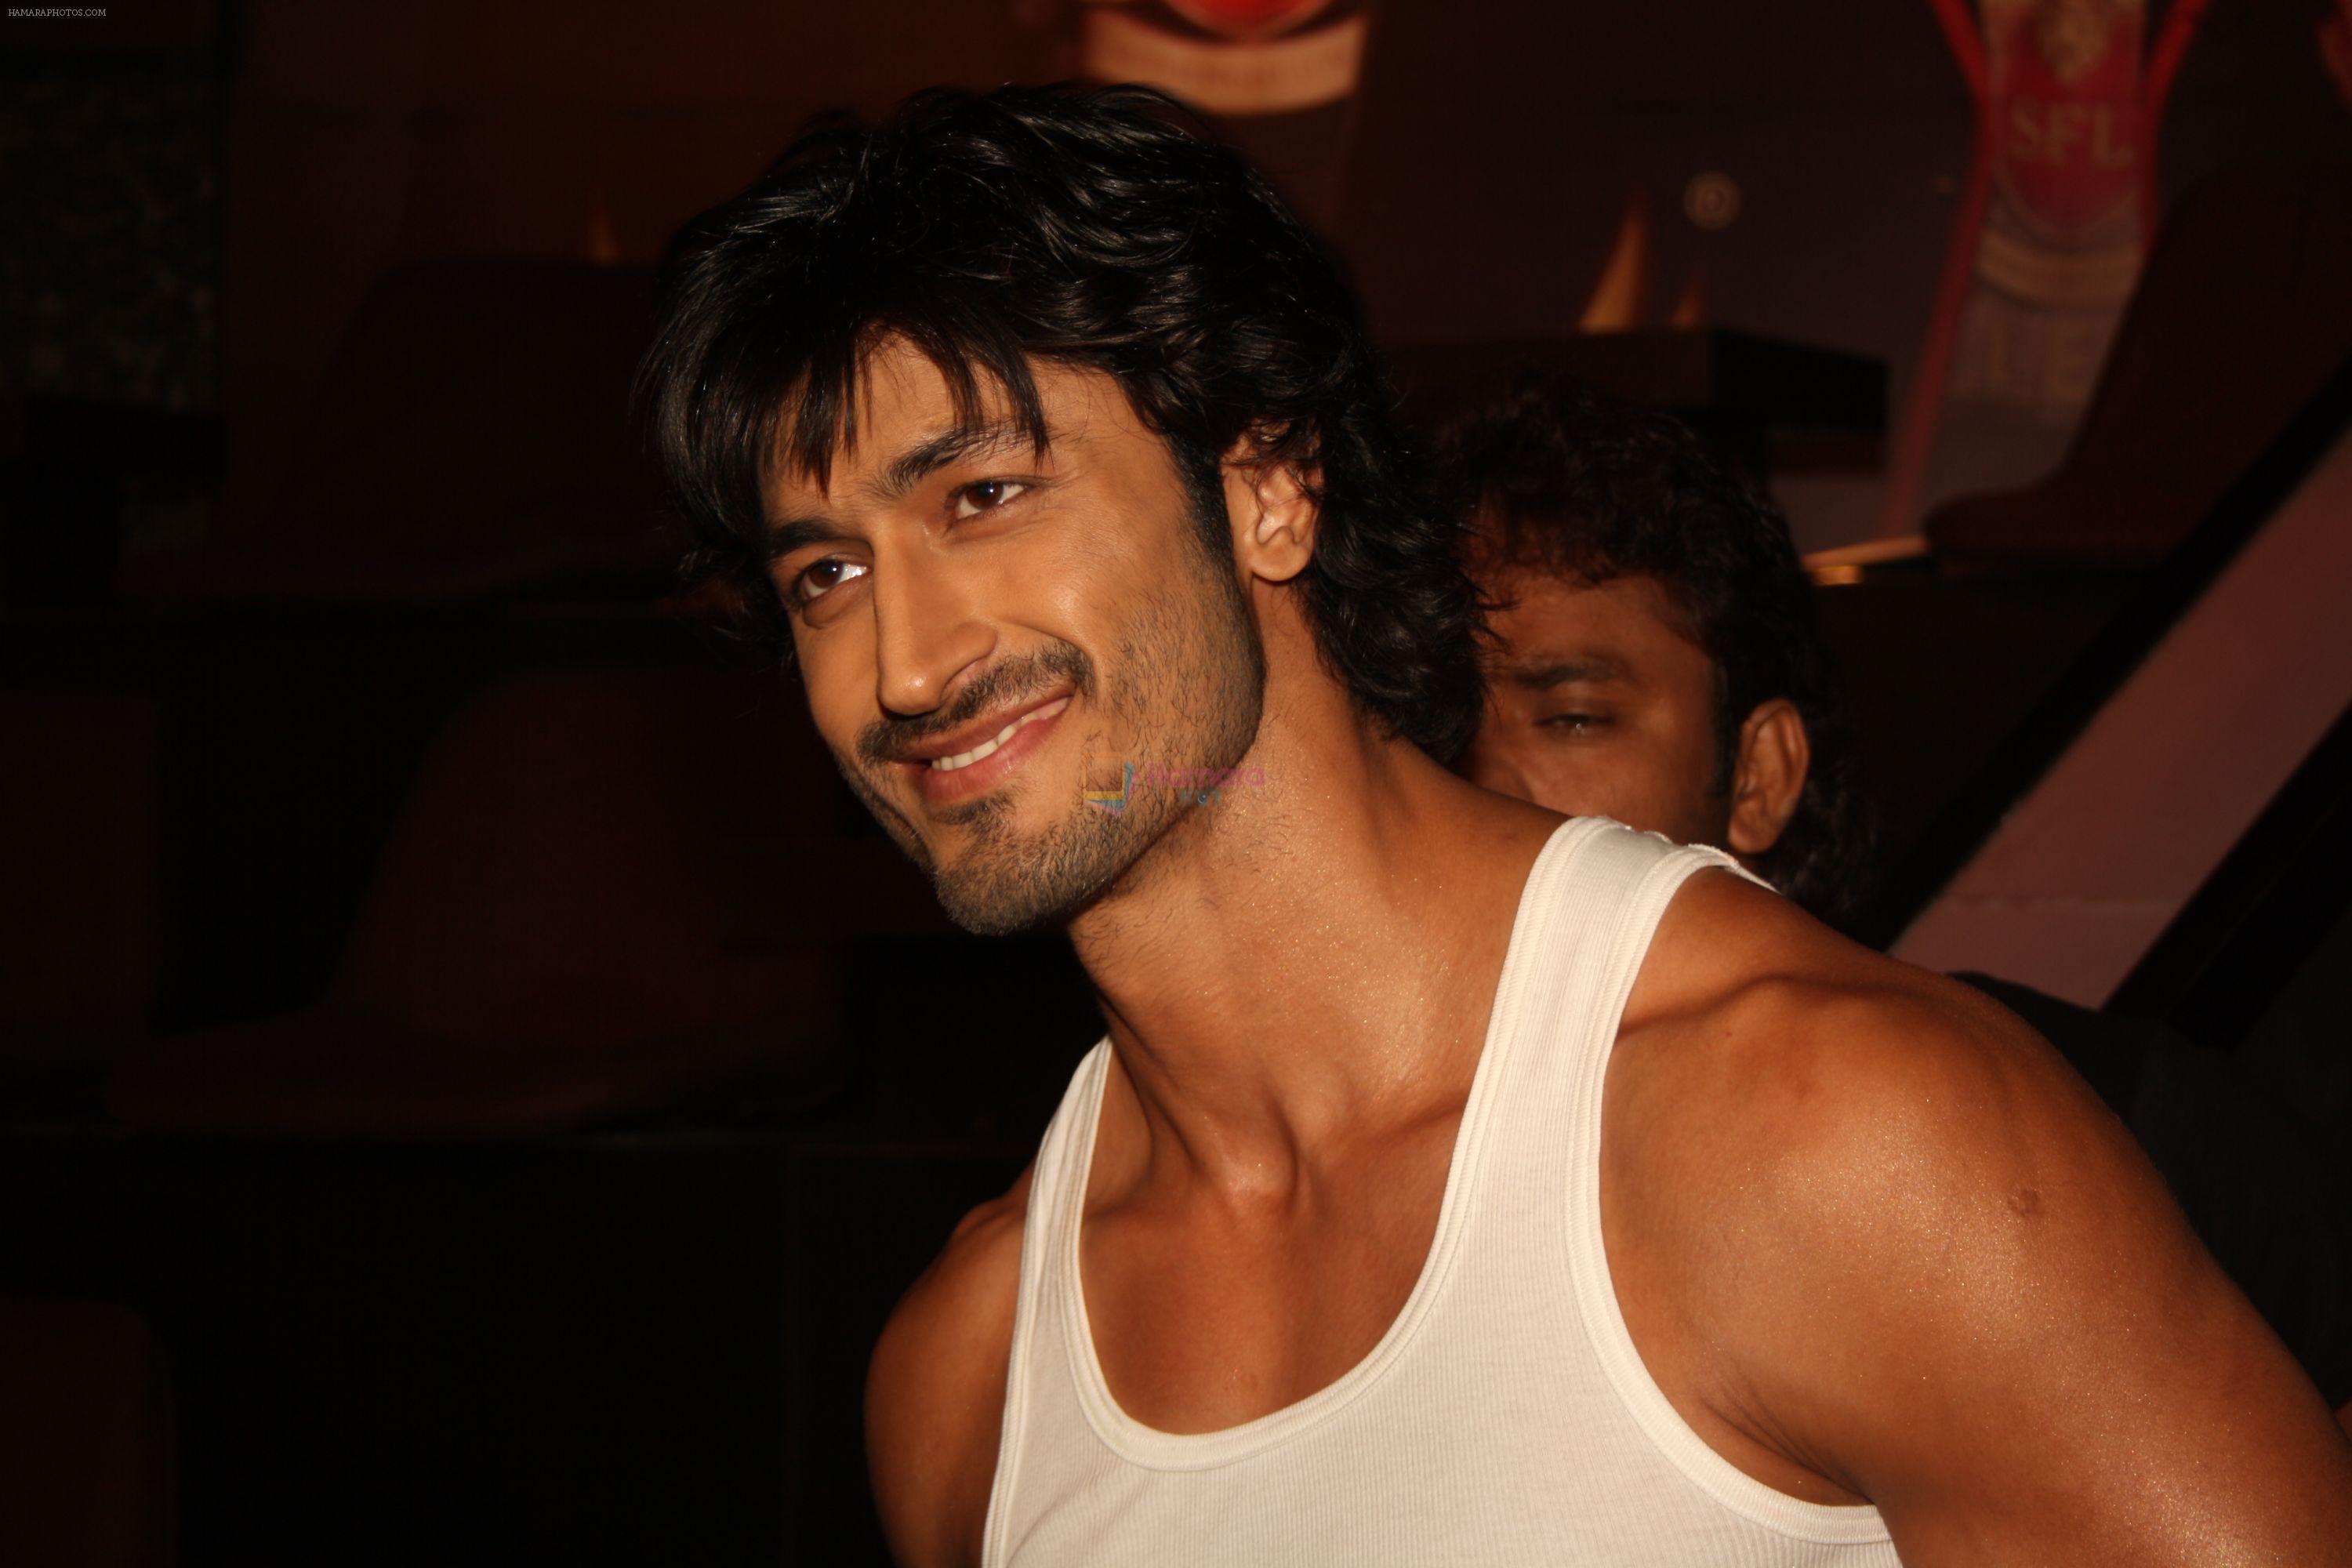 Vidyut Jamwal at SFL-14, Friday Fight Nights Post Event in Mumbai on 29th March 2013